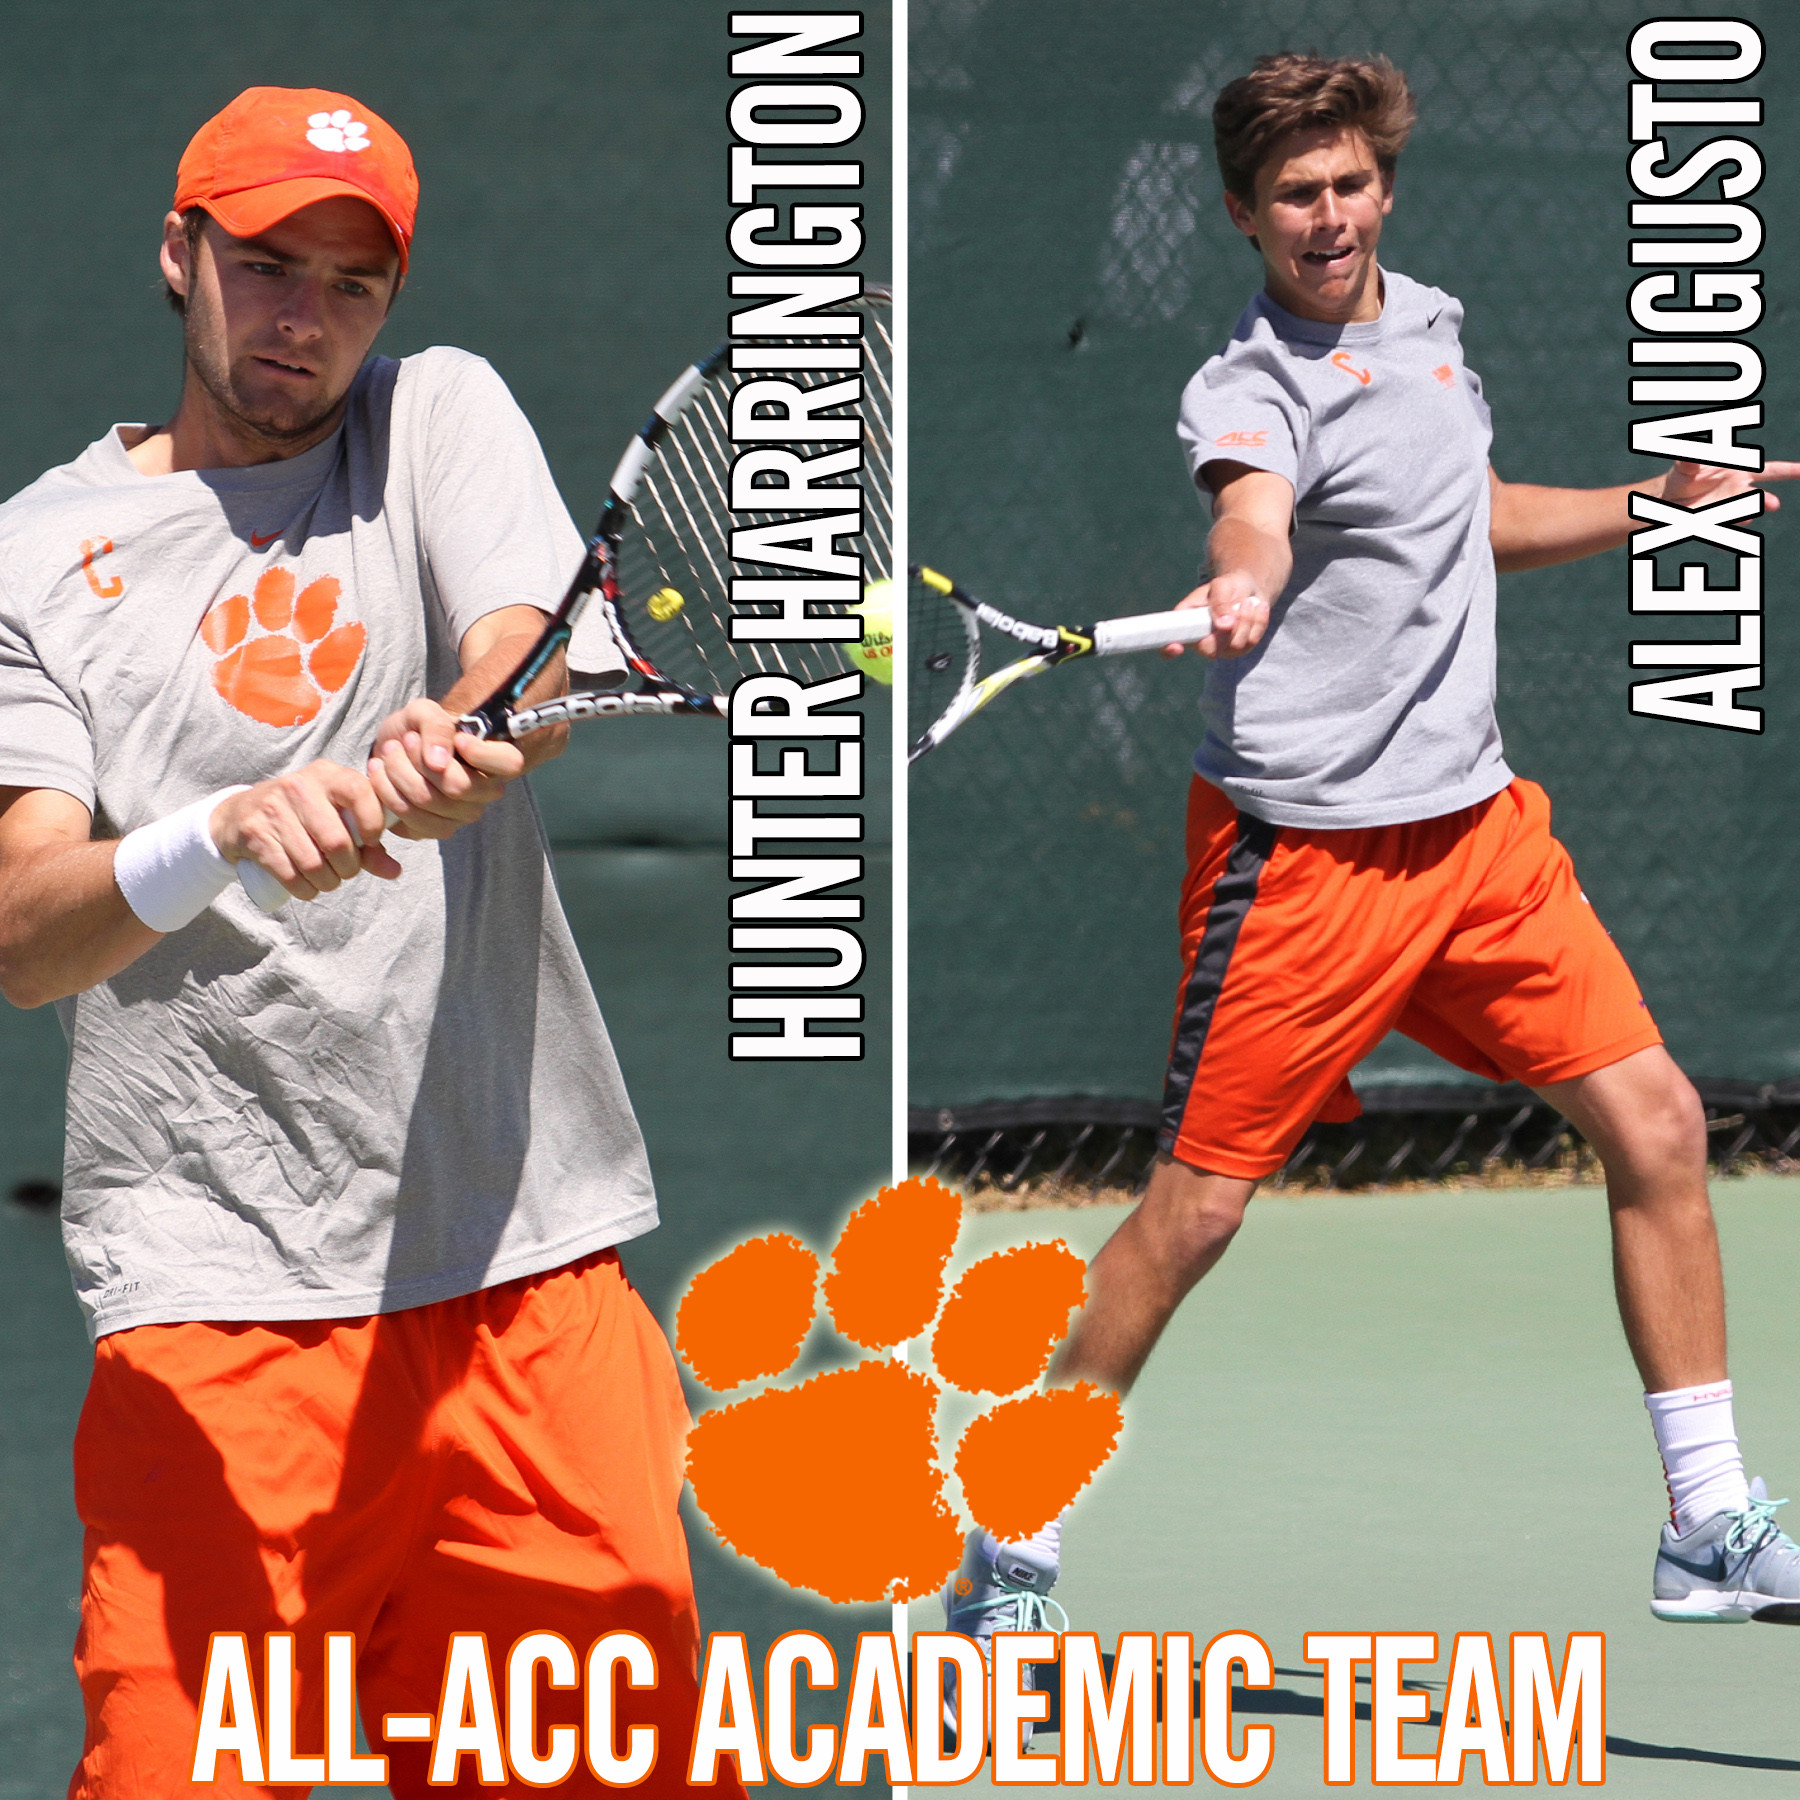 Harrington and Augusto Named to All-ACC Academic Team